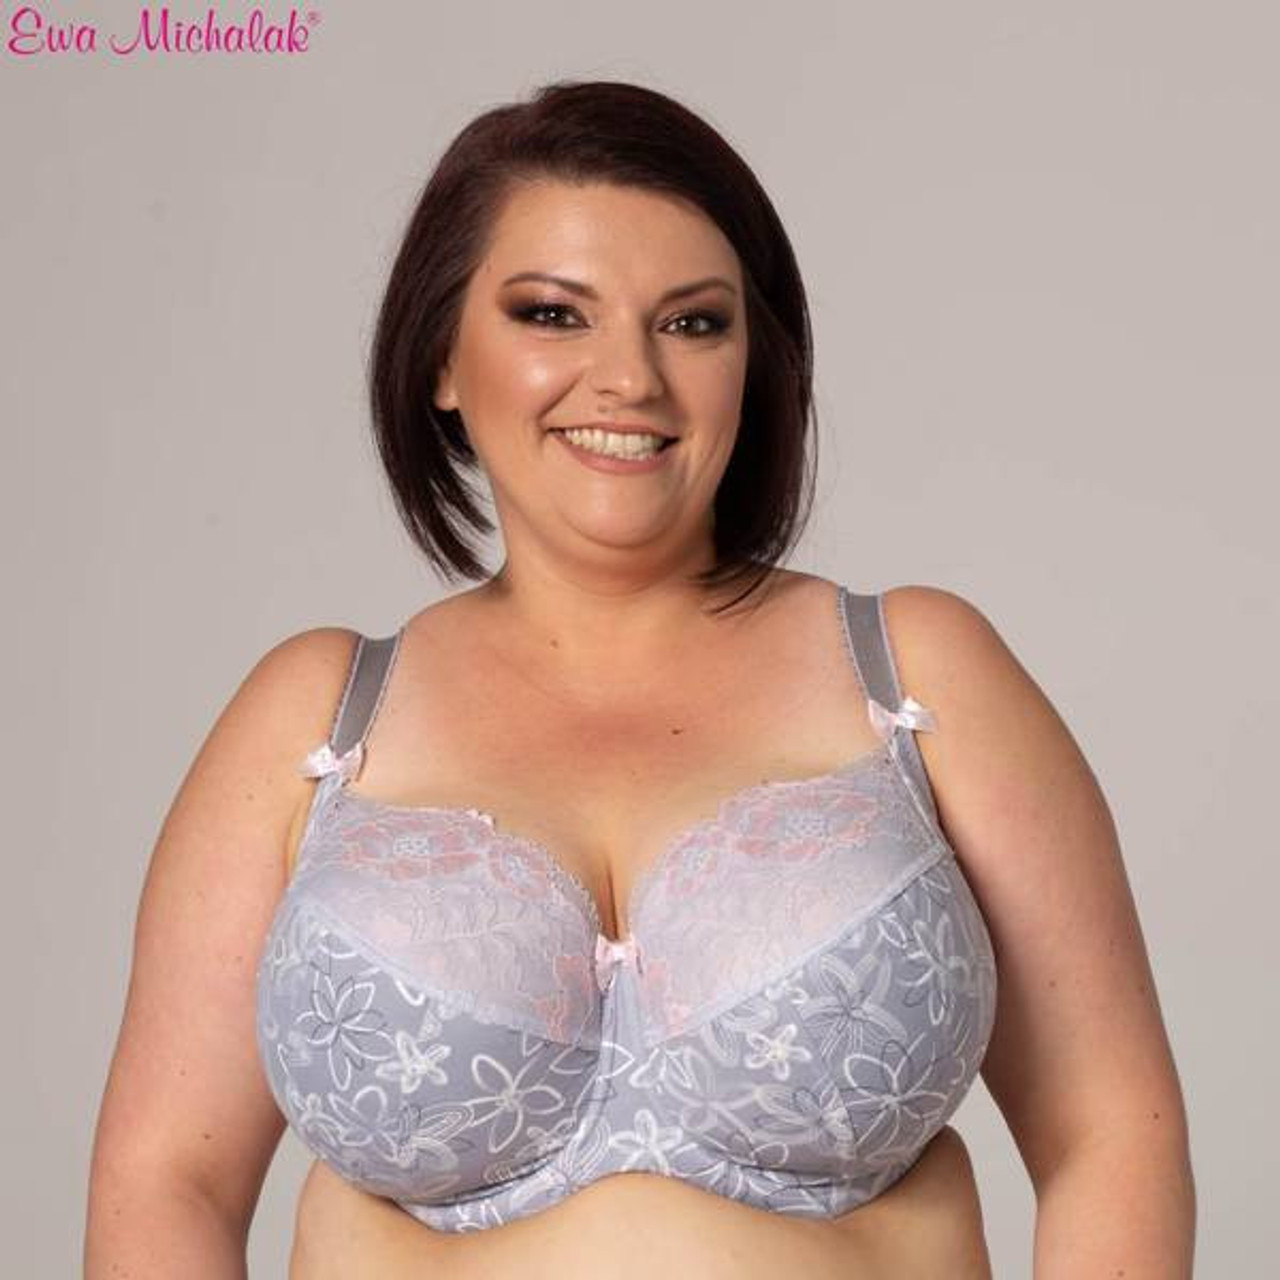 Levana Bratique - Having trouble picking out which bra or lingerie